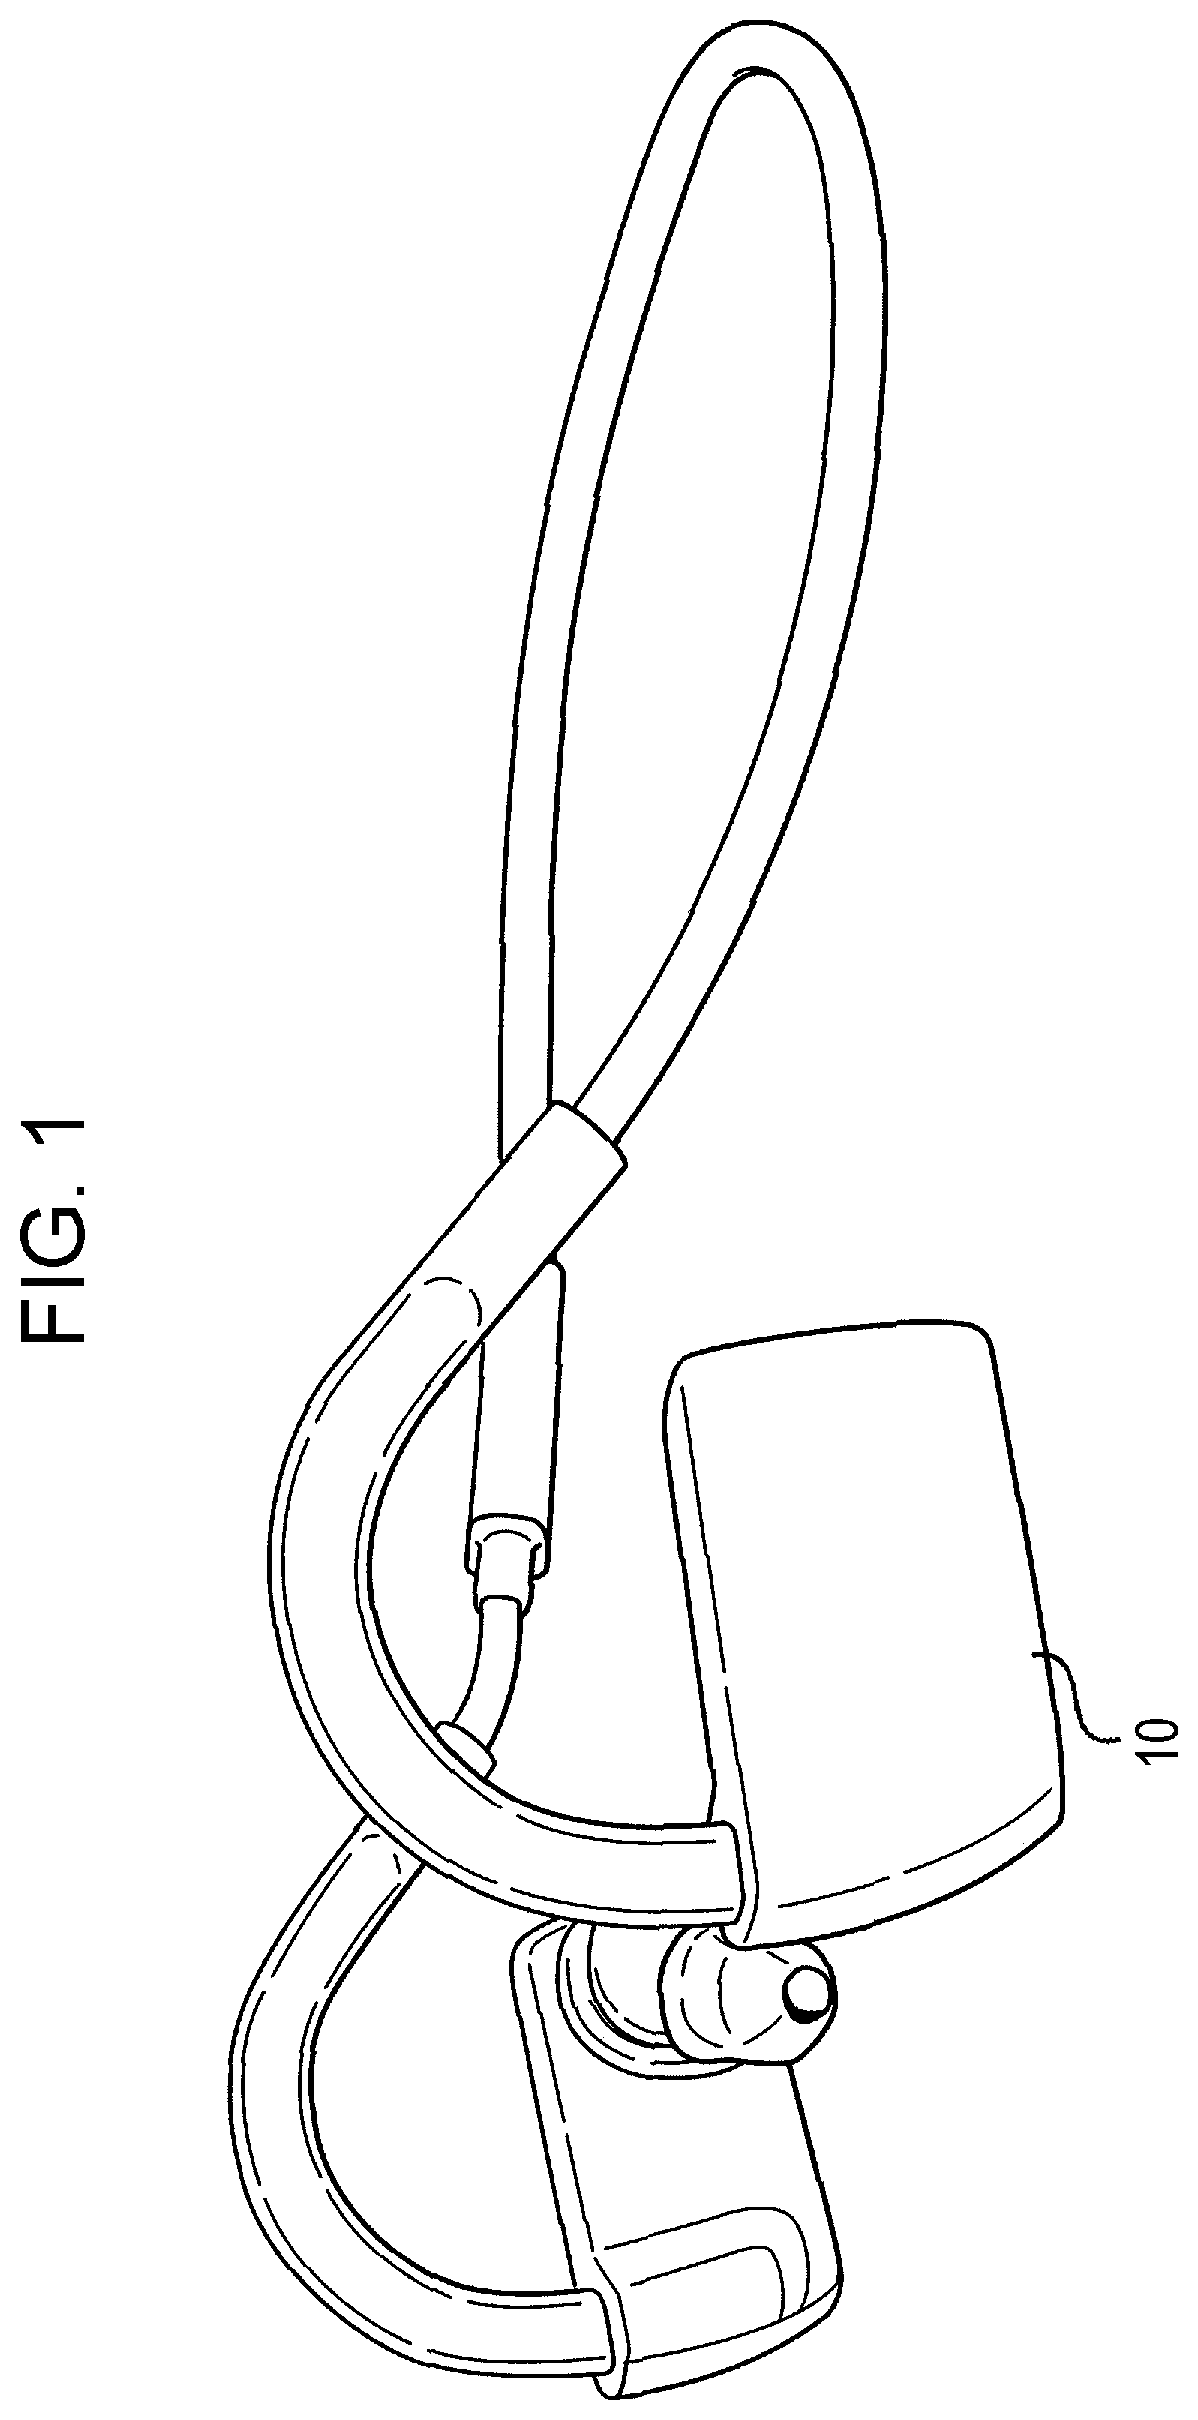 Biopotential measurement device and non-transitory computer readable medium